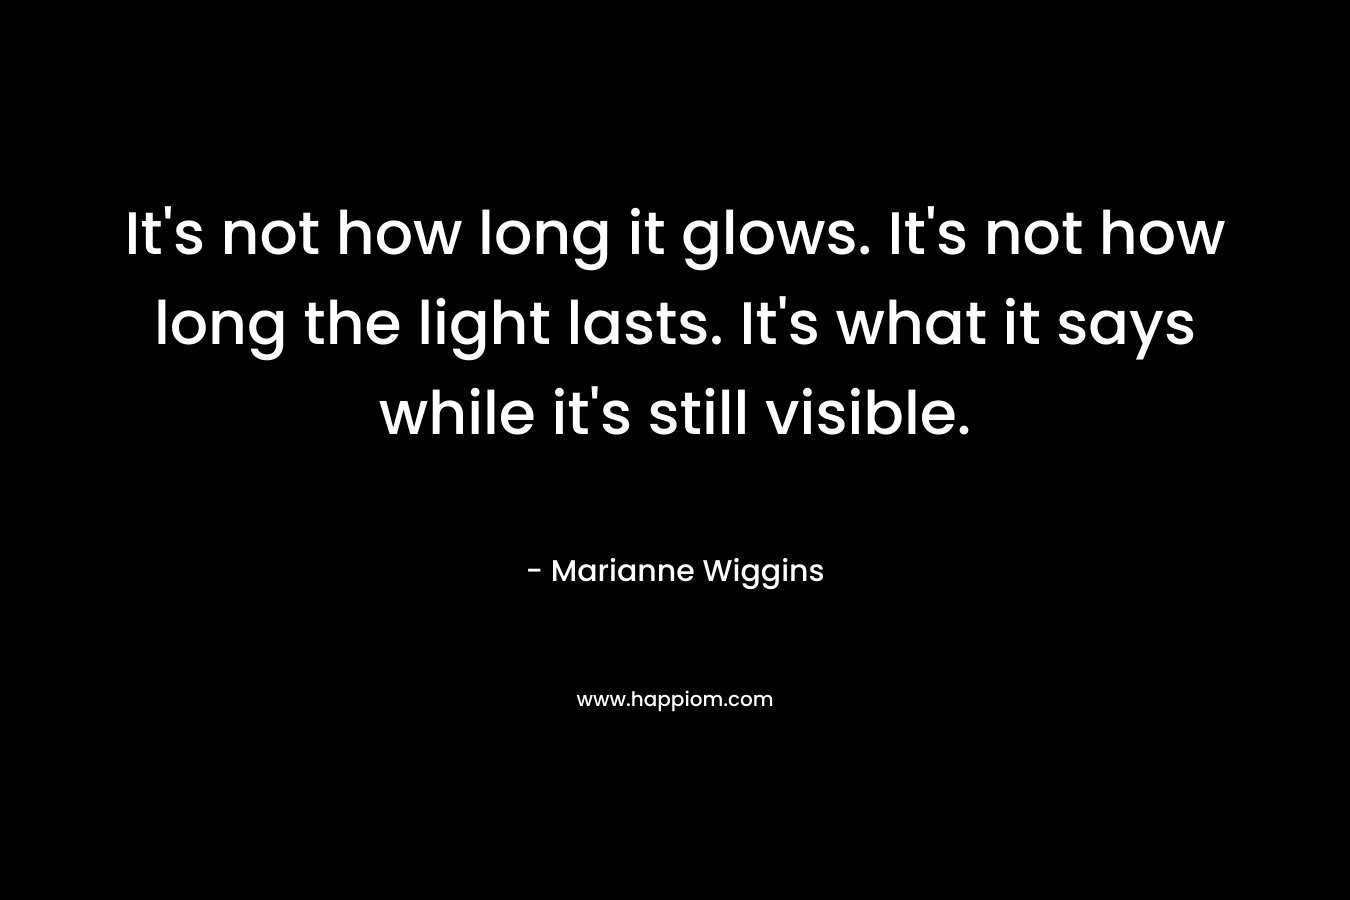 It's not how long it glows. It's not how long the light lasts. It's what it says while it's still visible.